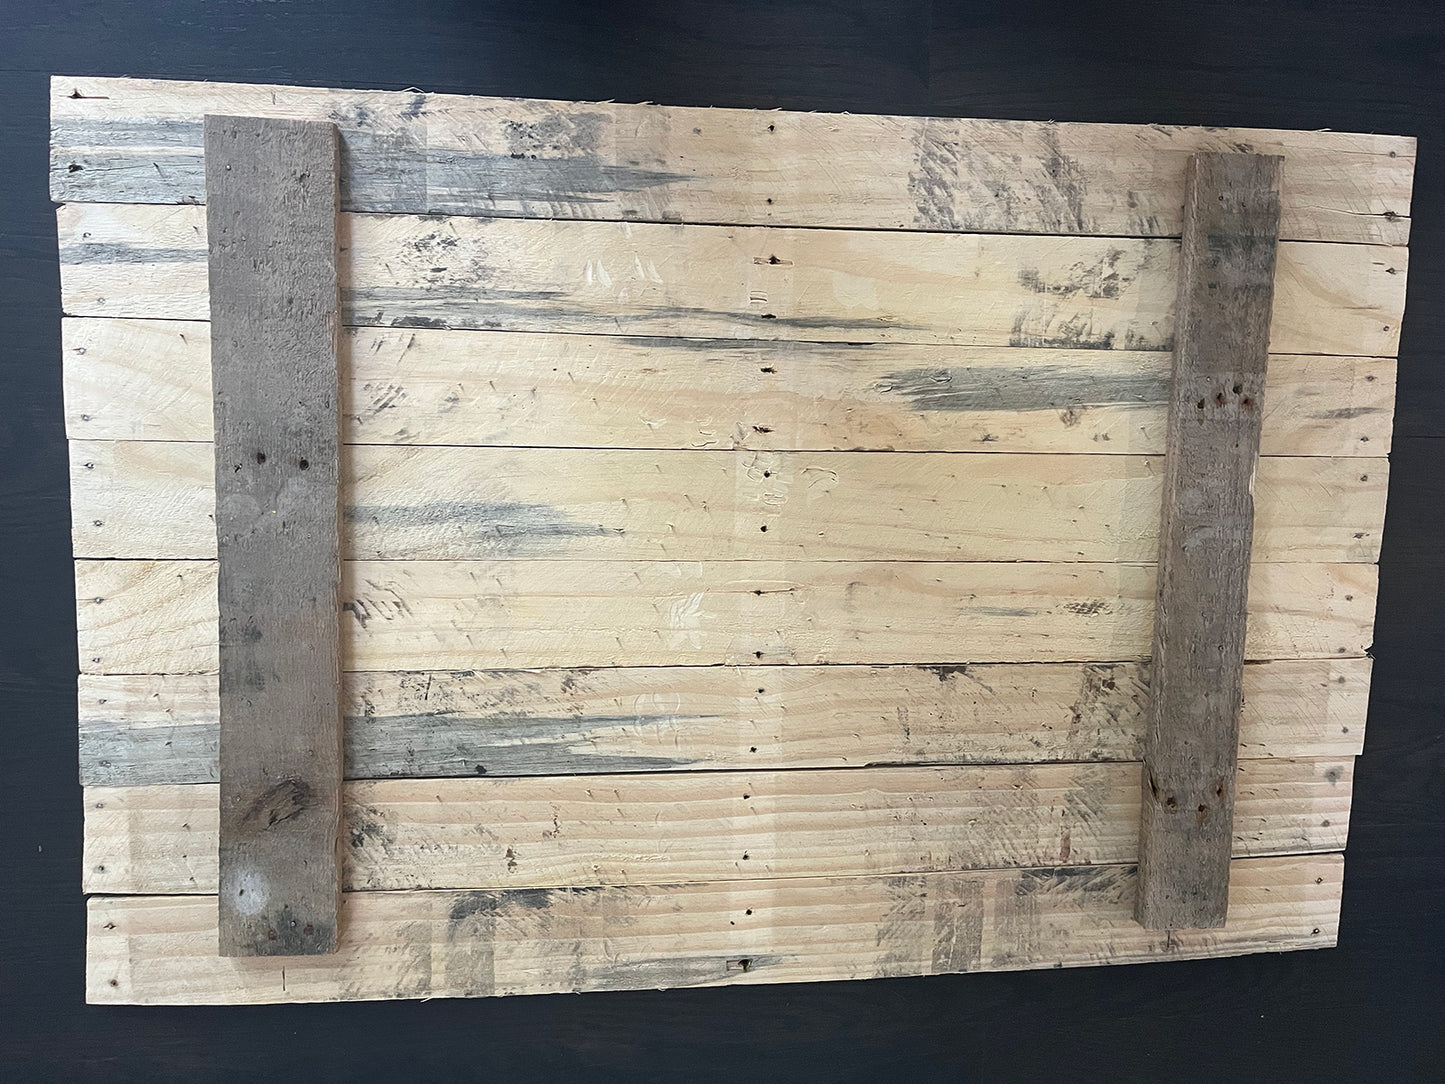 In-Stock License Plate Map of USA on Pallet Wood